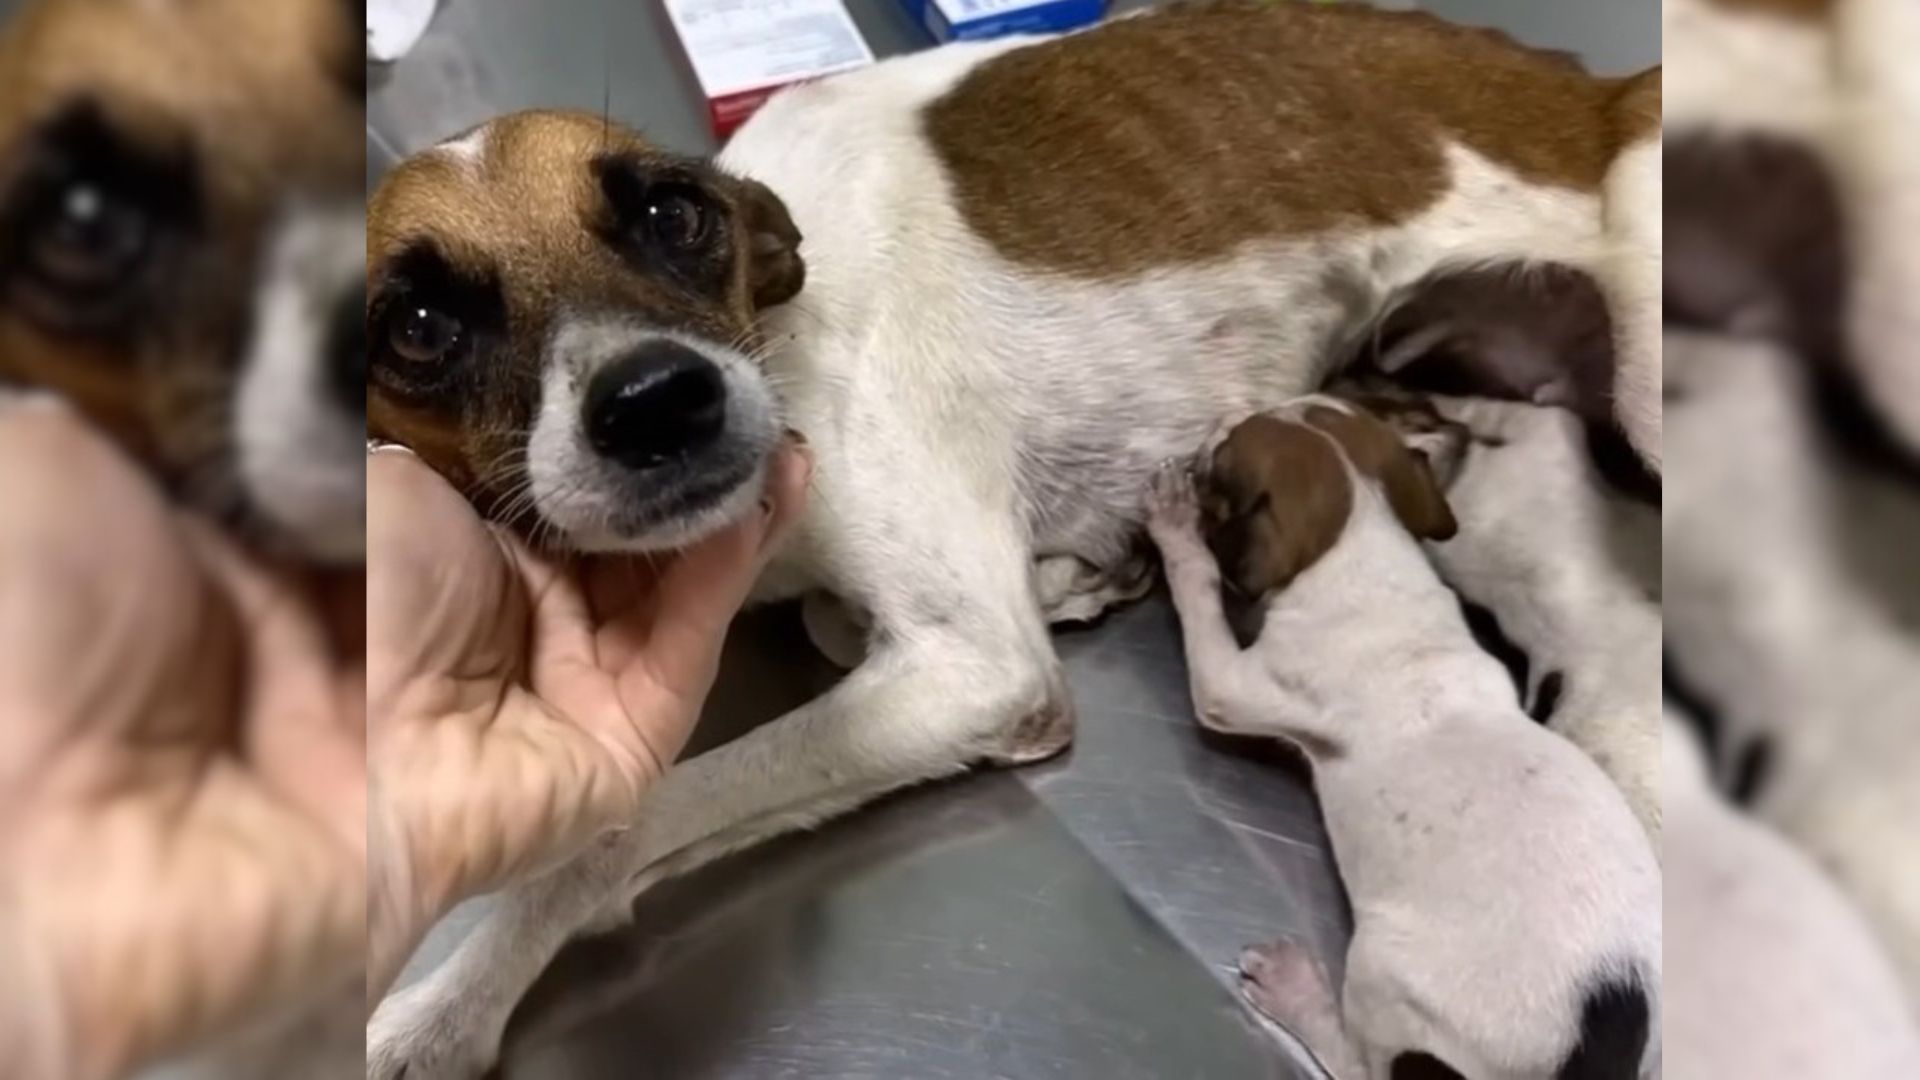 Rescuers Were Surprised To Find Mama Dog And Her 2 Puppies In A Trashed Vehicle So They Went To Help